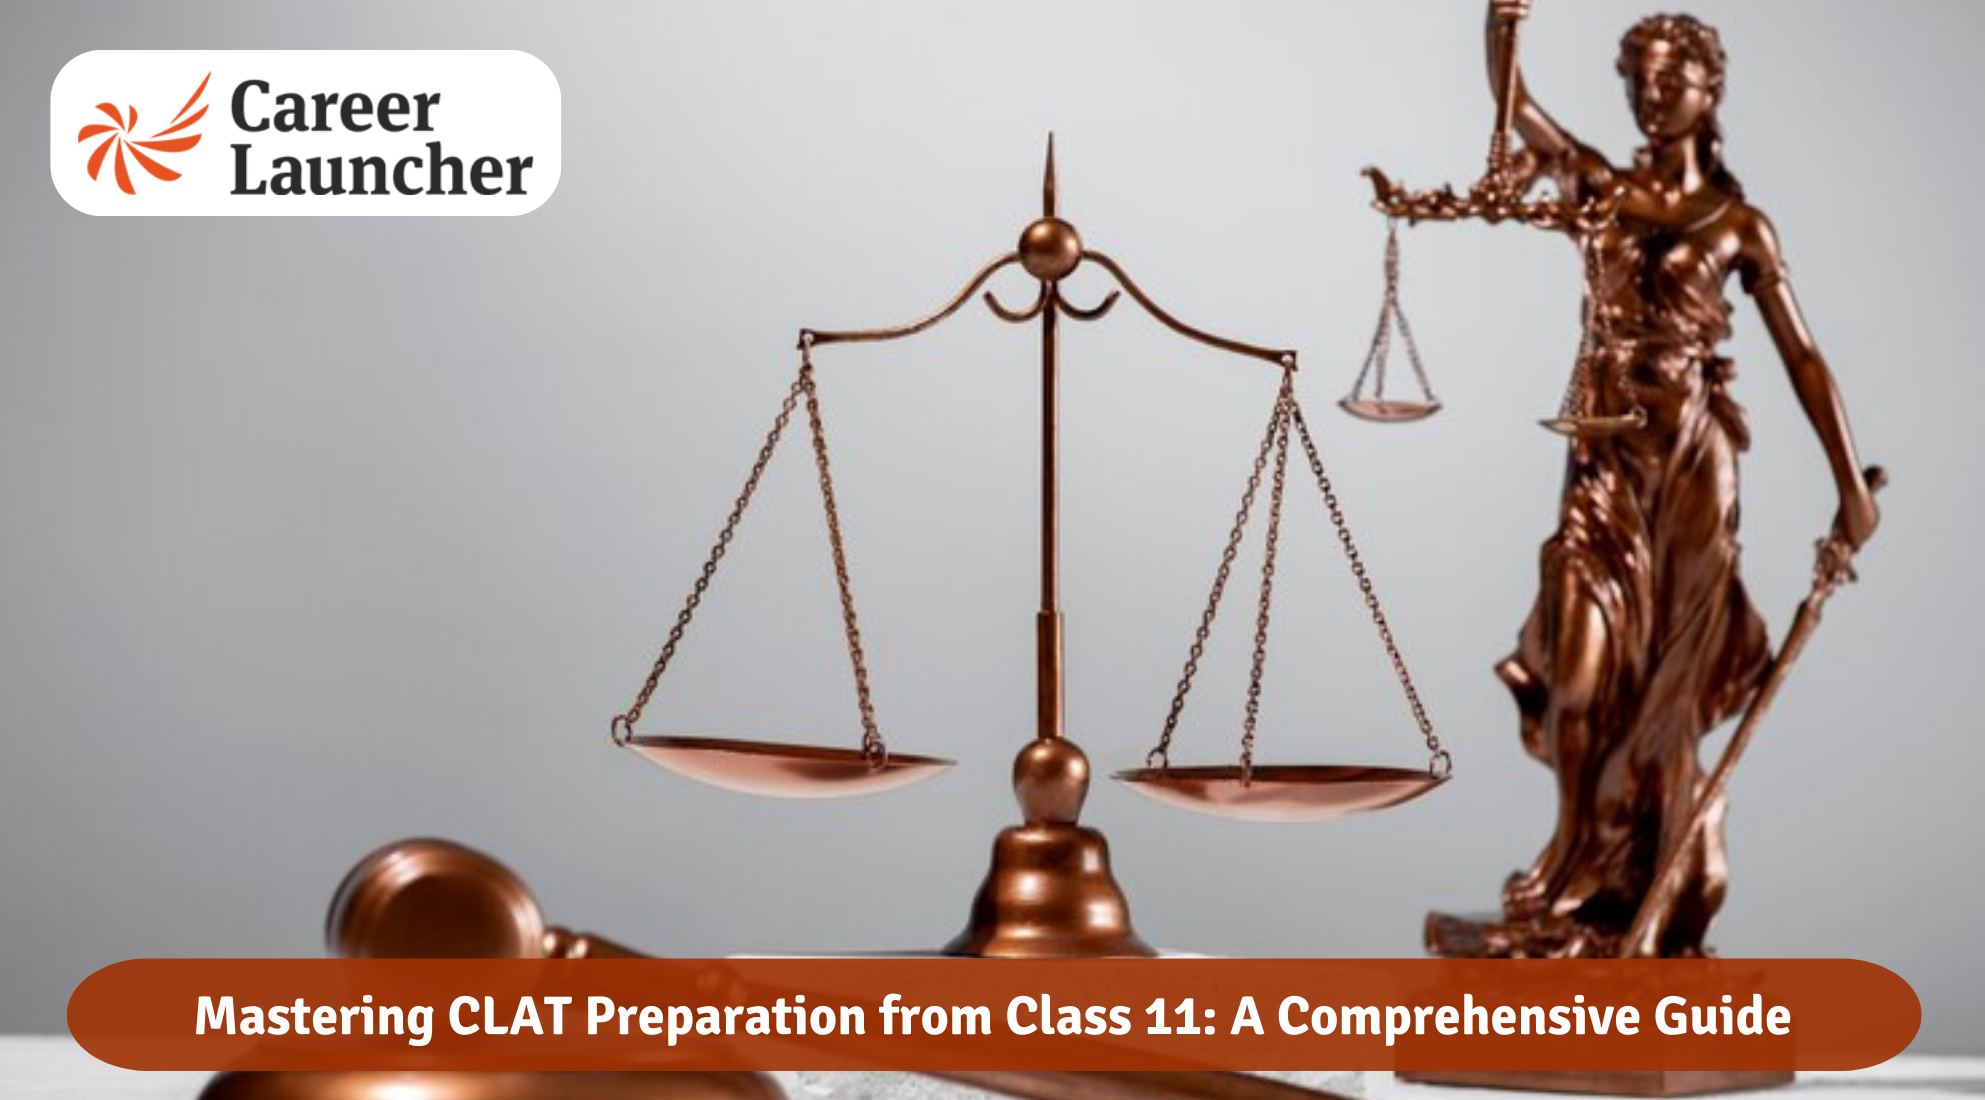 Mastering CLAT Preparation from Class 11: A Comprehensive Guide